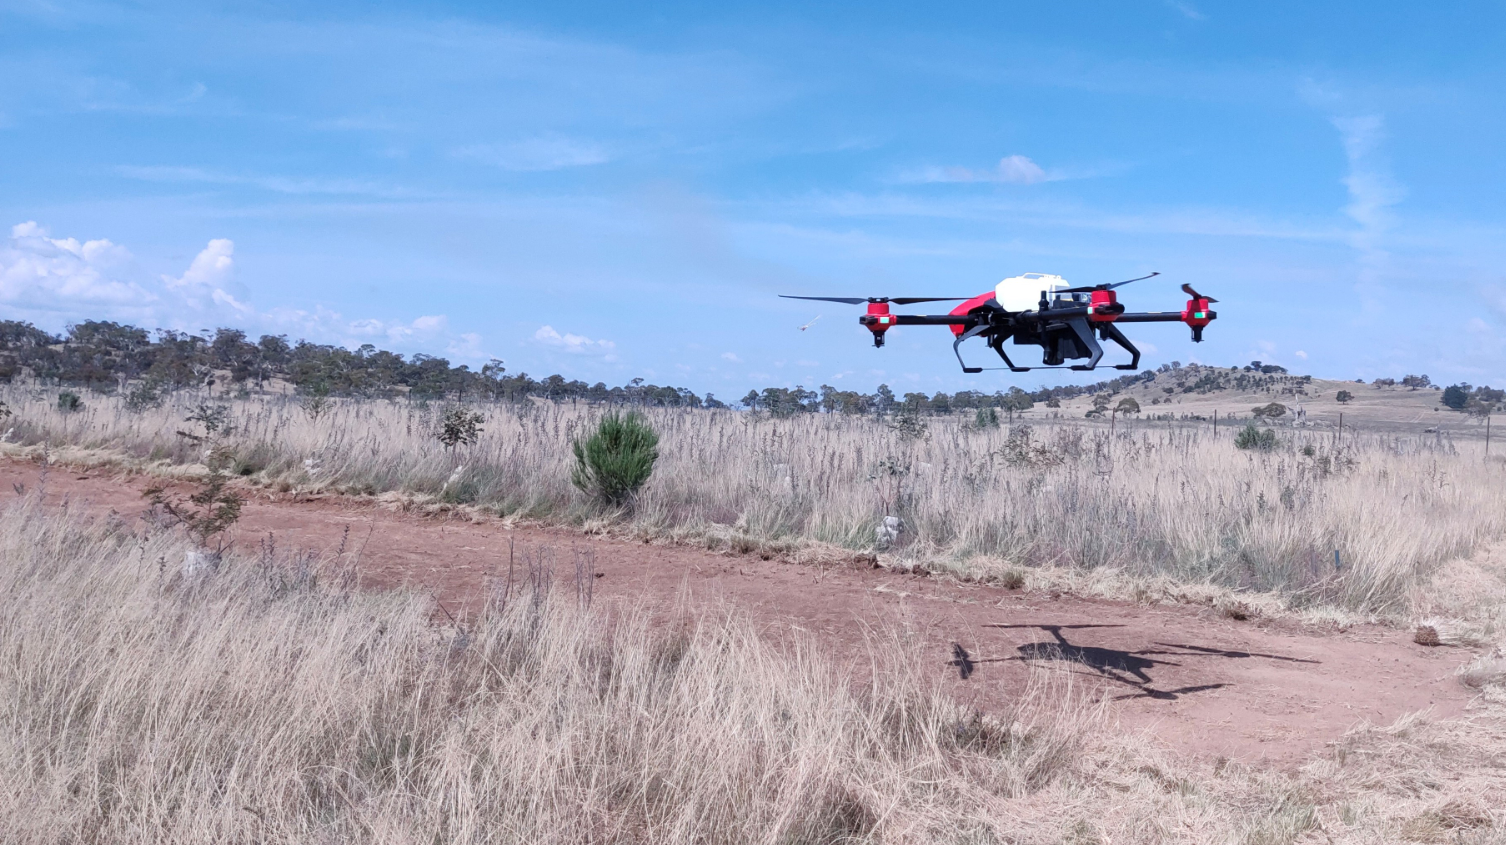 XAG Agricultural Drone seeded the degraded pasture